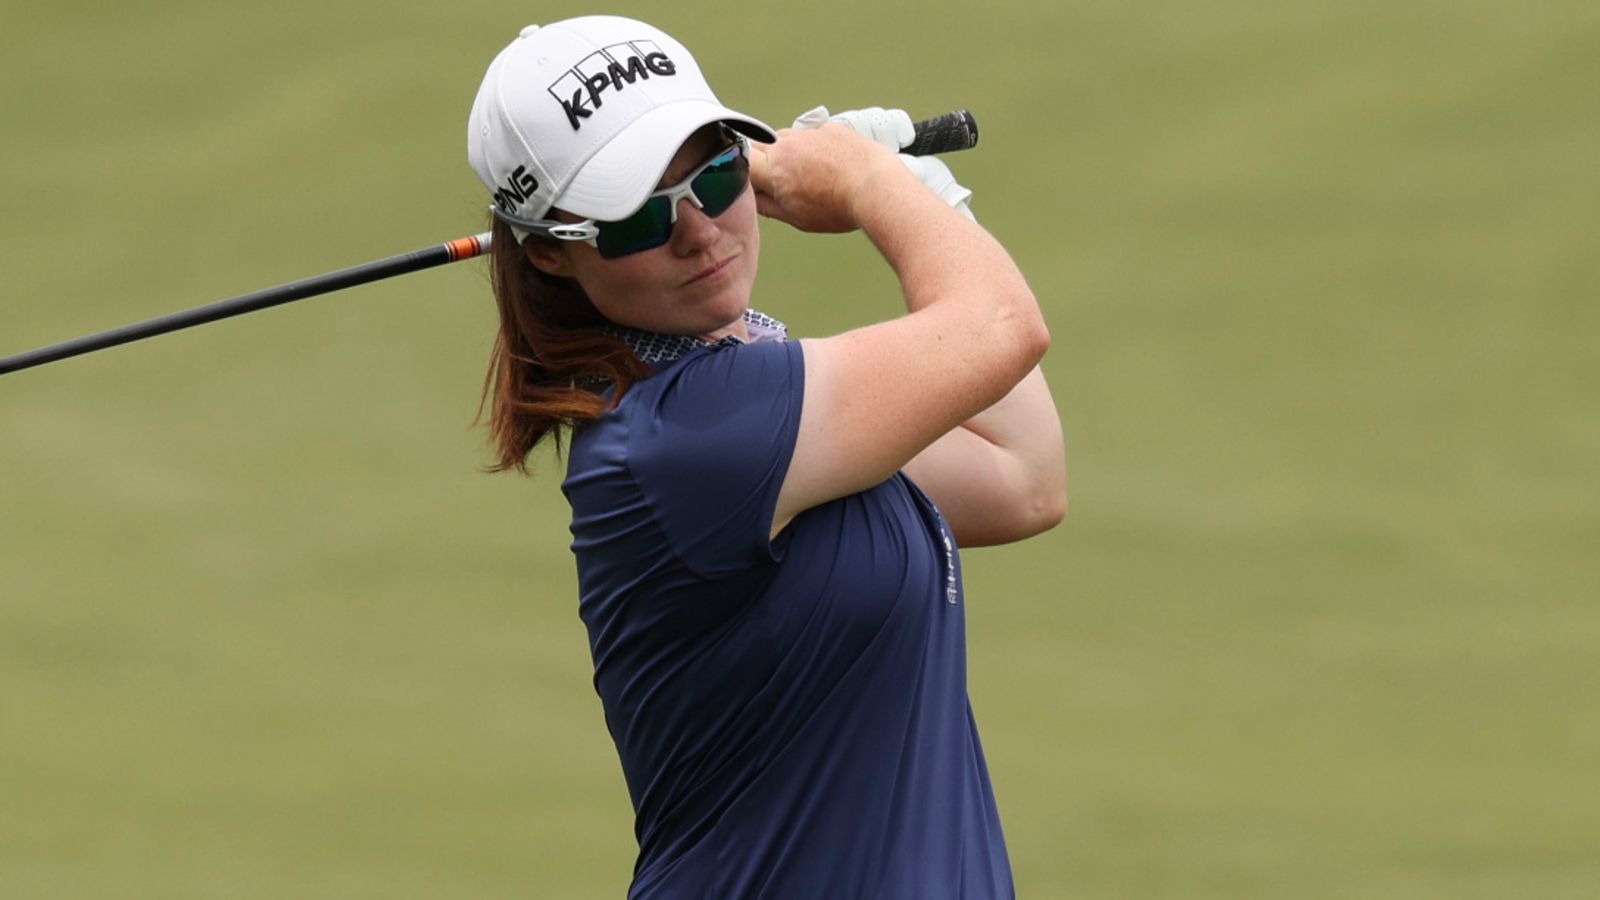 Bank of Hope LPGA MatchPlay Leona Maguire makes it two wins from two